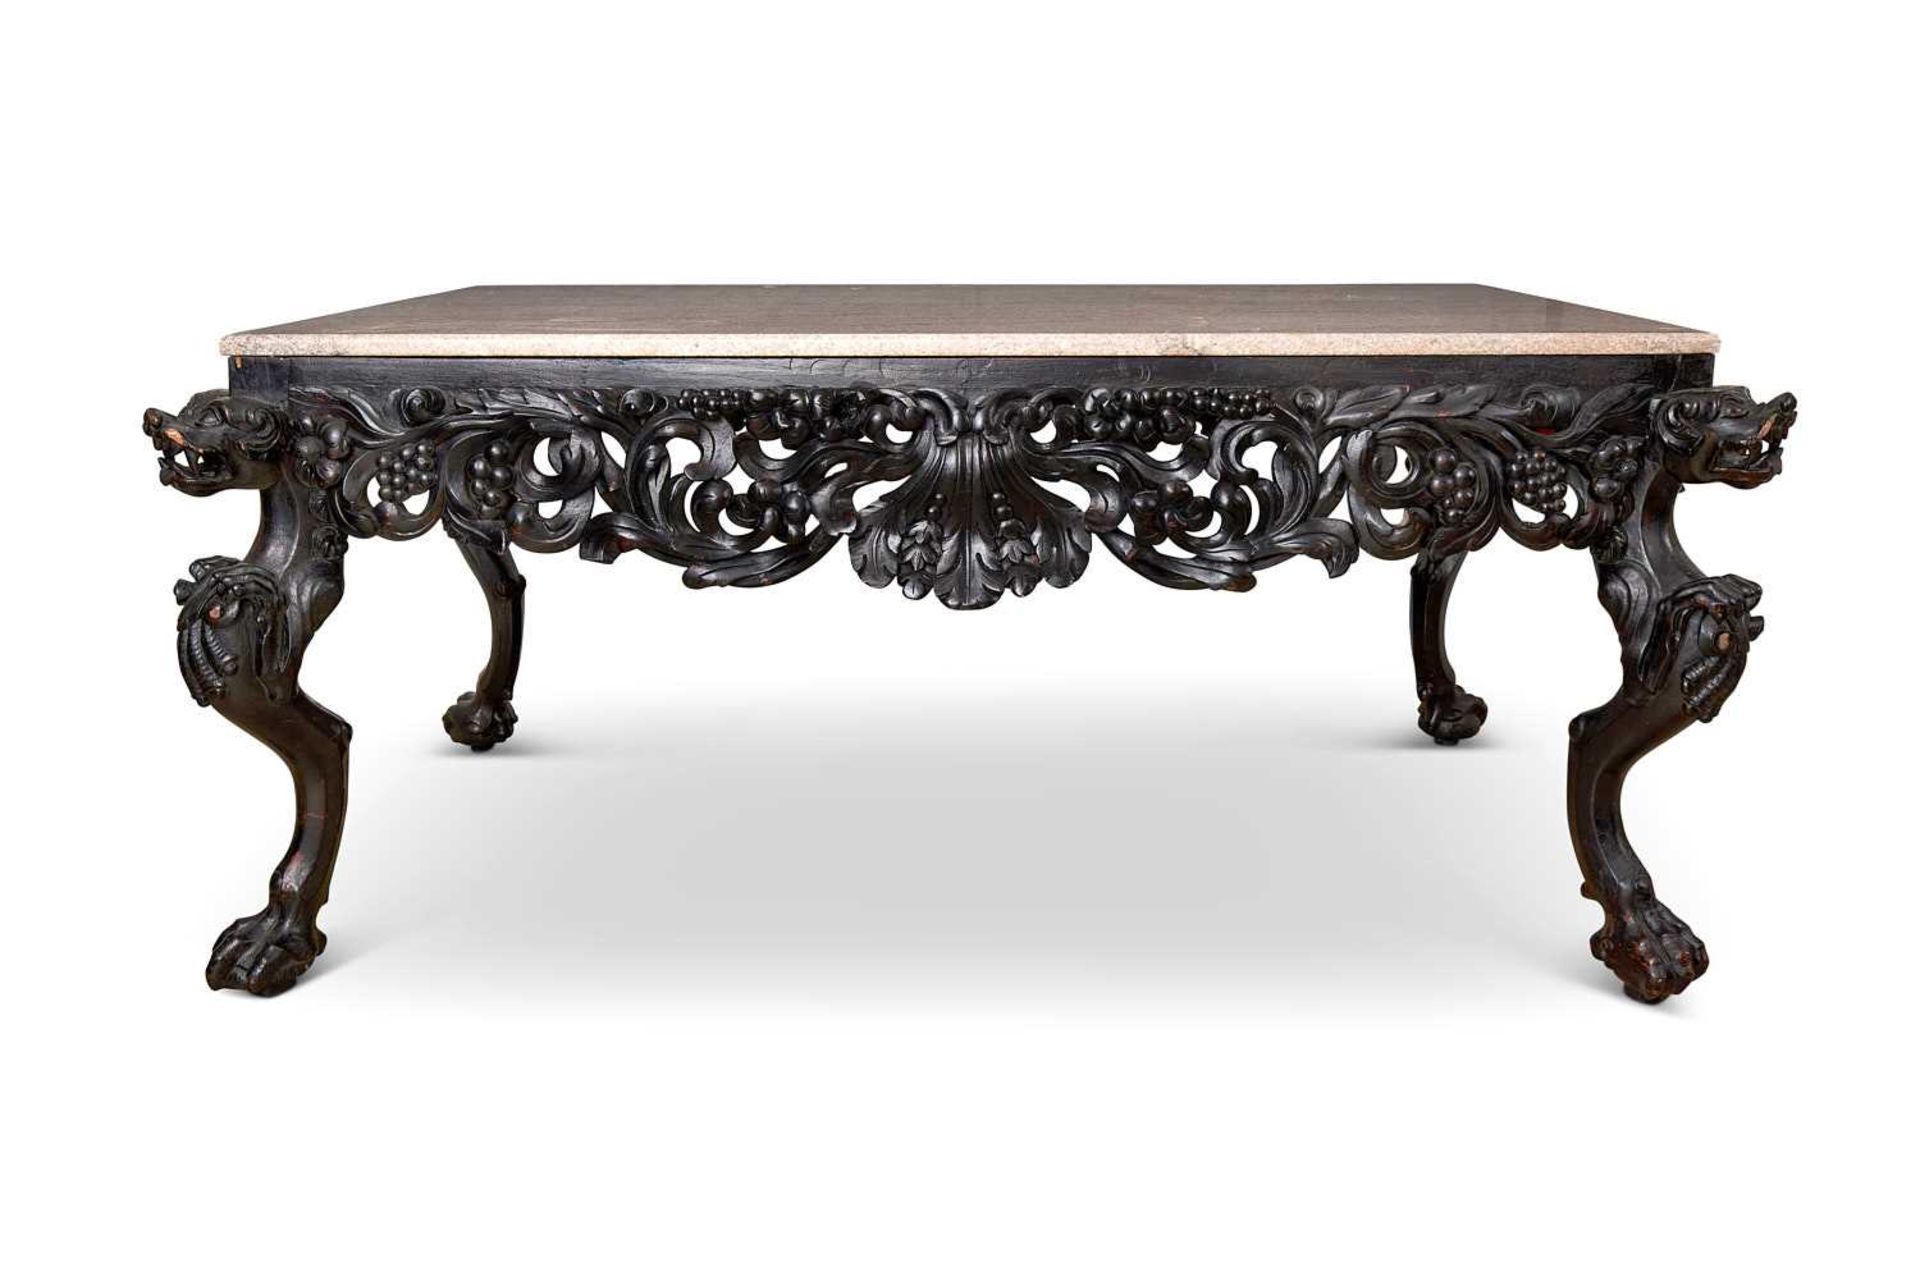 A 19TH CENTURY GEORGE II STYLE CARVED WOOD AND MARBLE TOPPED HALL TABLE